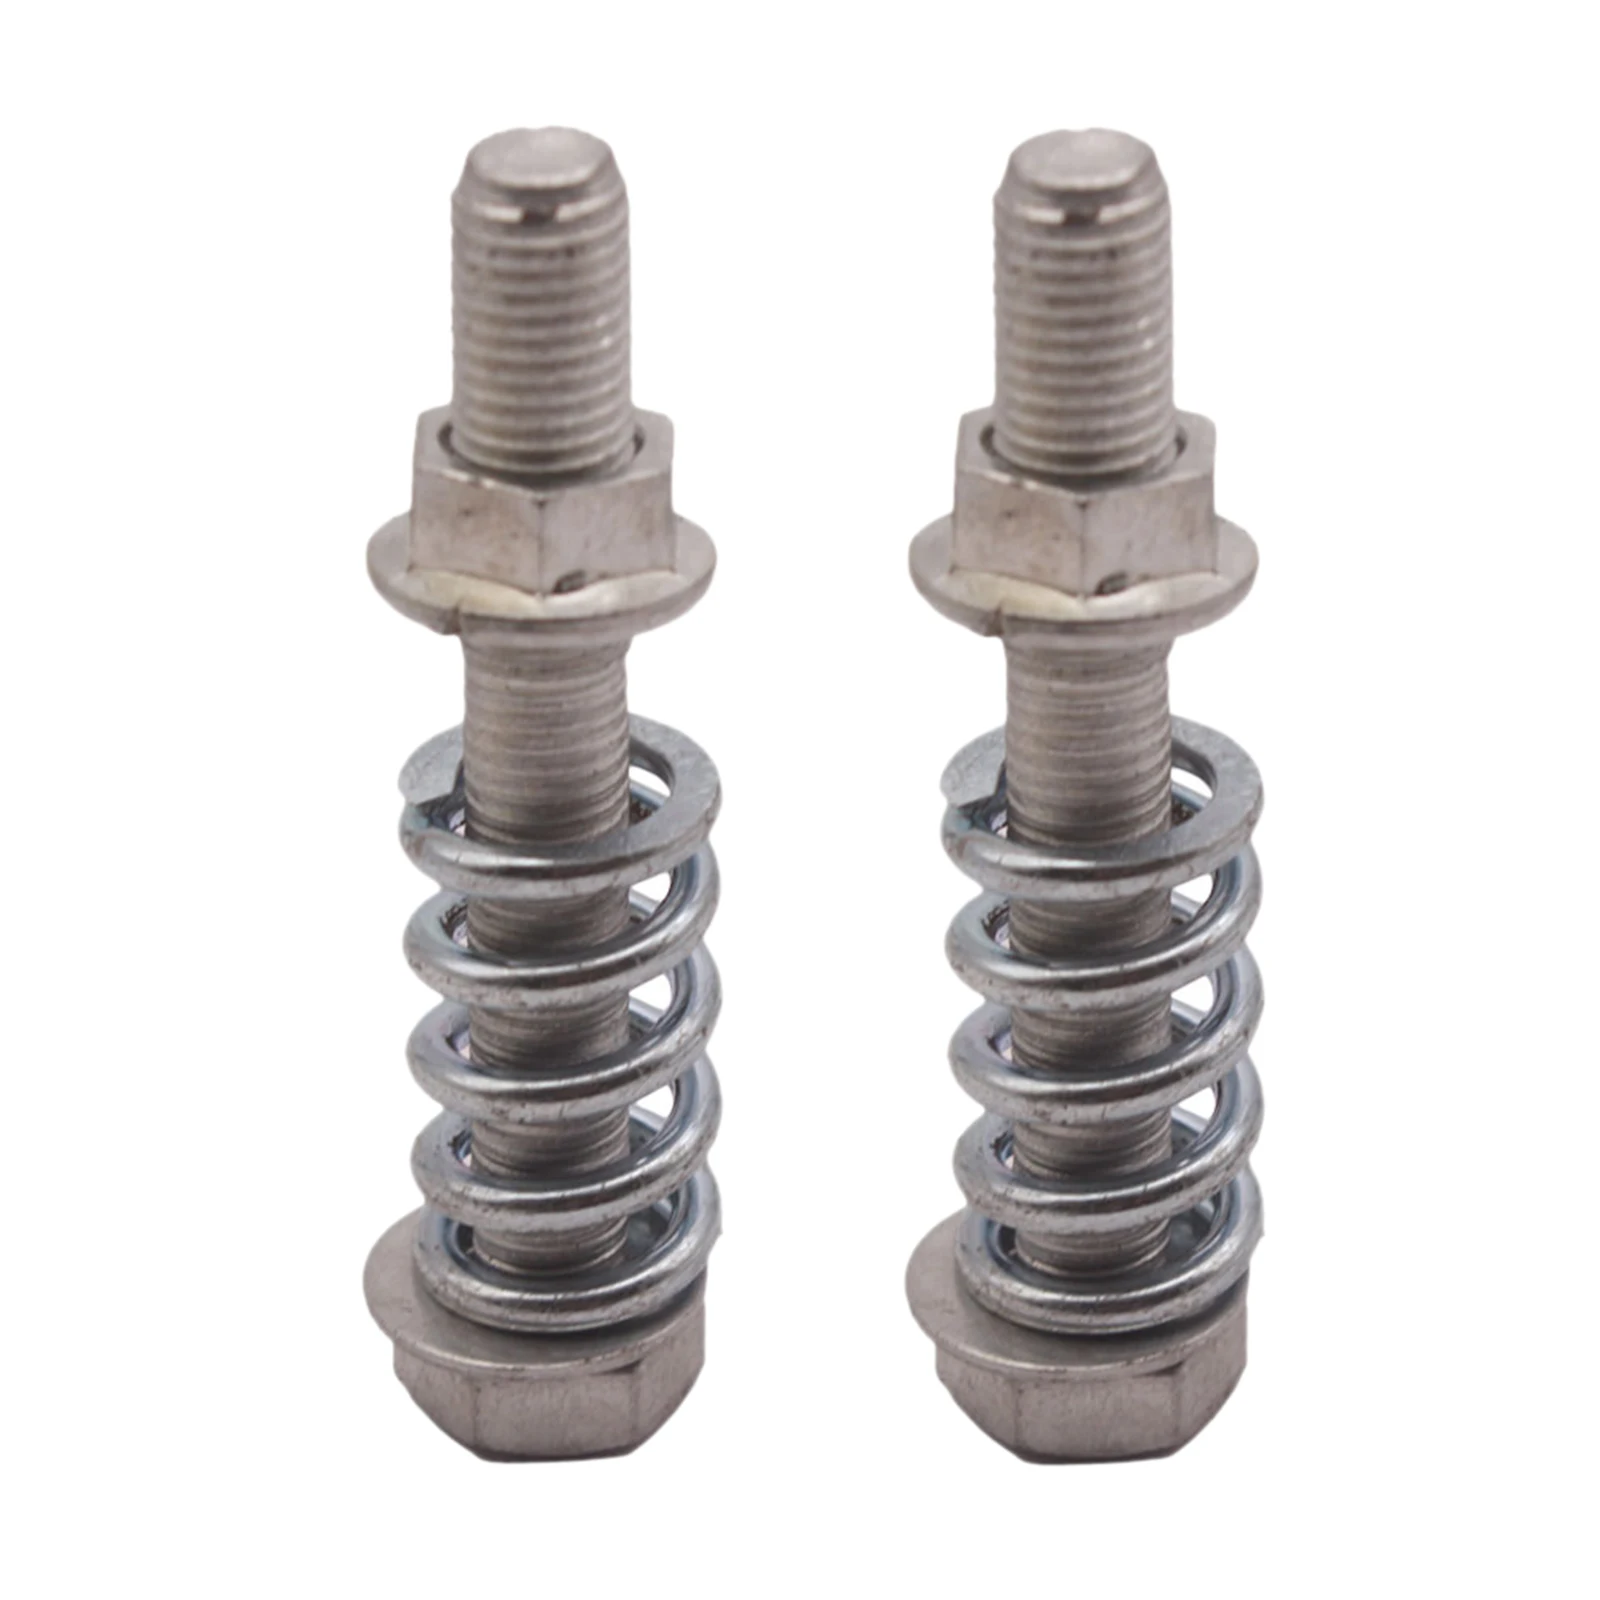 2Pcs M10x1.5 Exhaust and Spring Stud Set Repair Replacement Parts